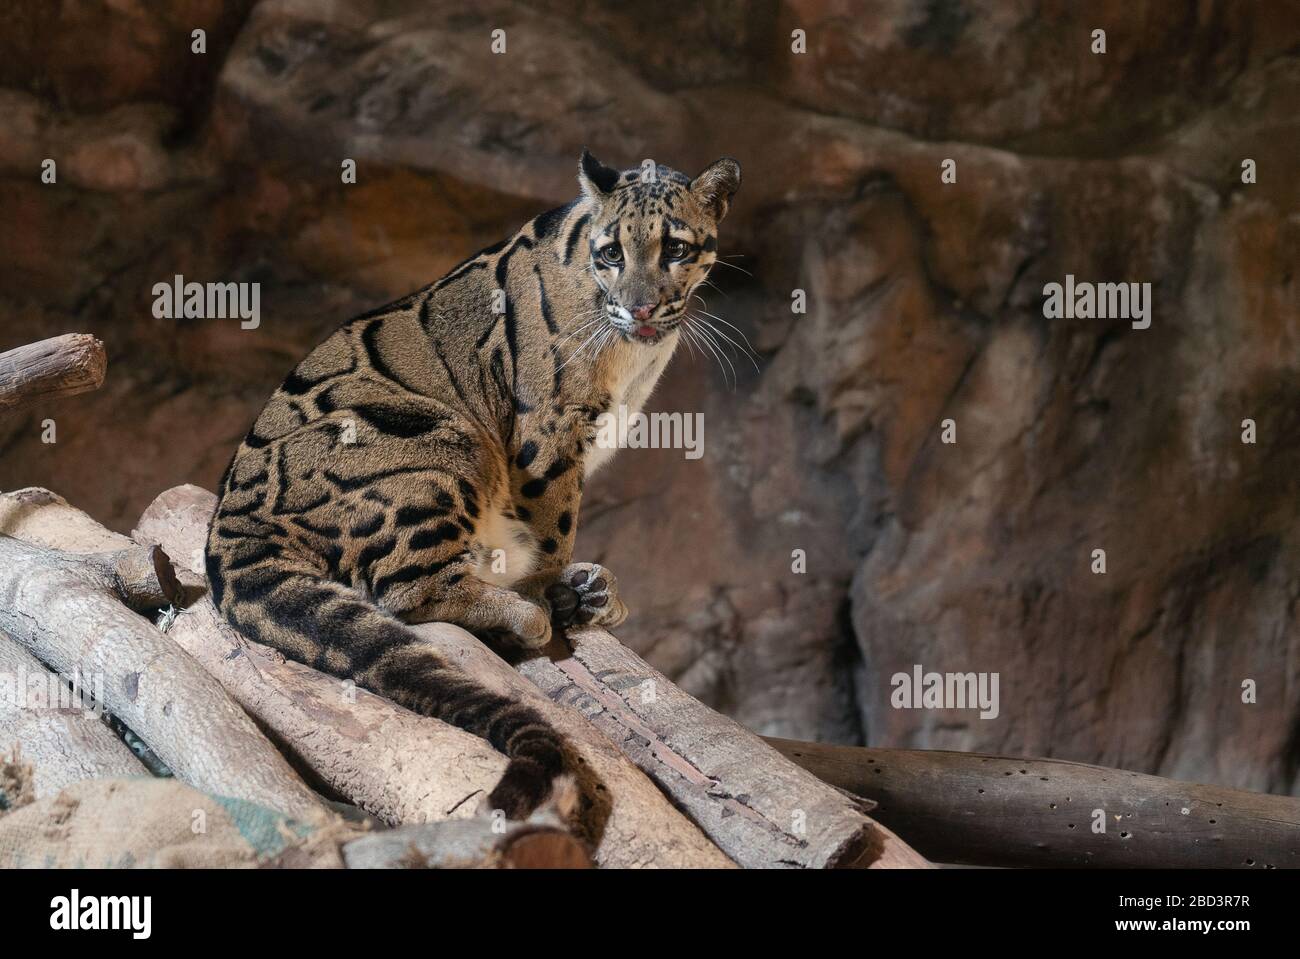 Clouded Leopard close up portrait in zoo Stock Photo